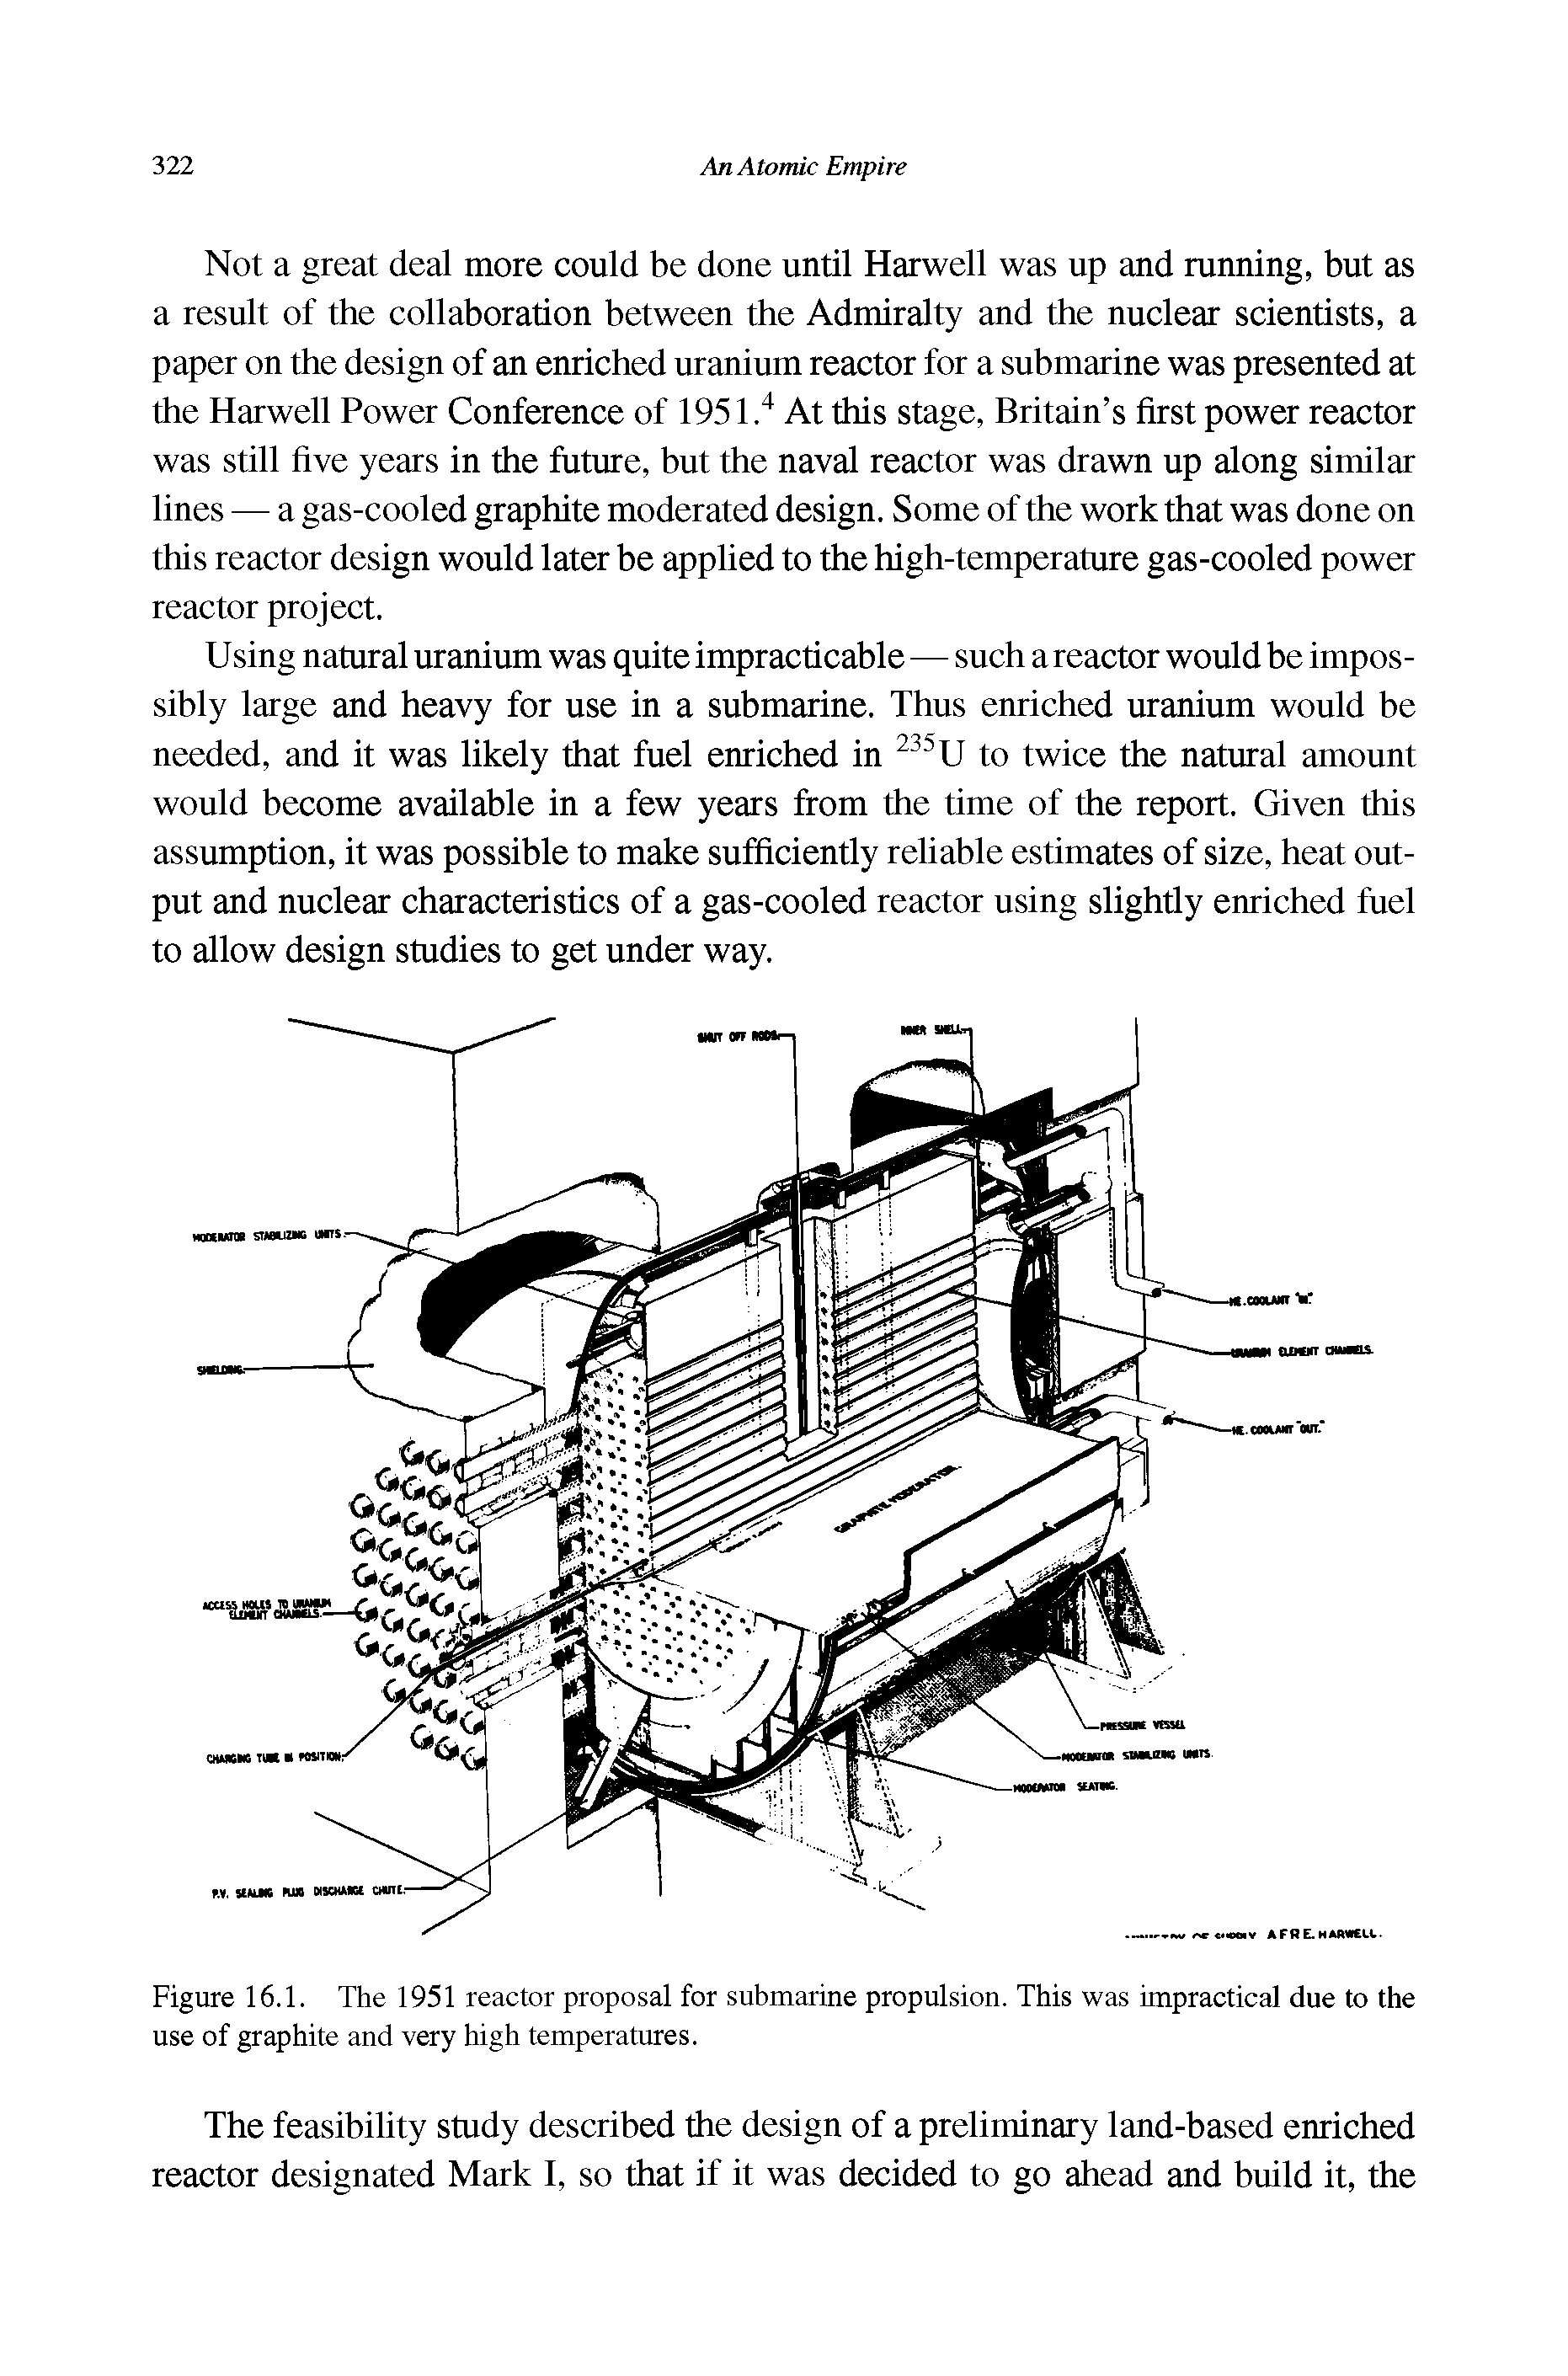 Figure 16.1. The 1951 reactor proposal for submarine propulsion. This was impractical due to the use of graphite and very high temperatures.